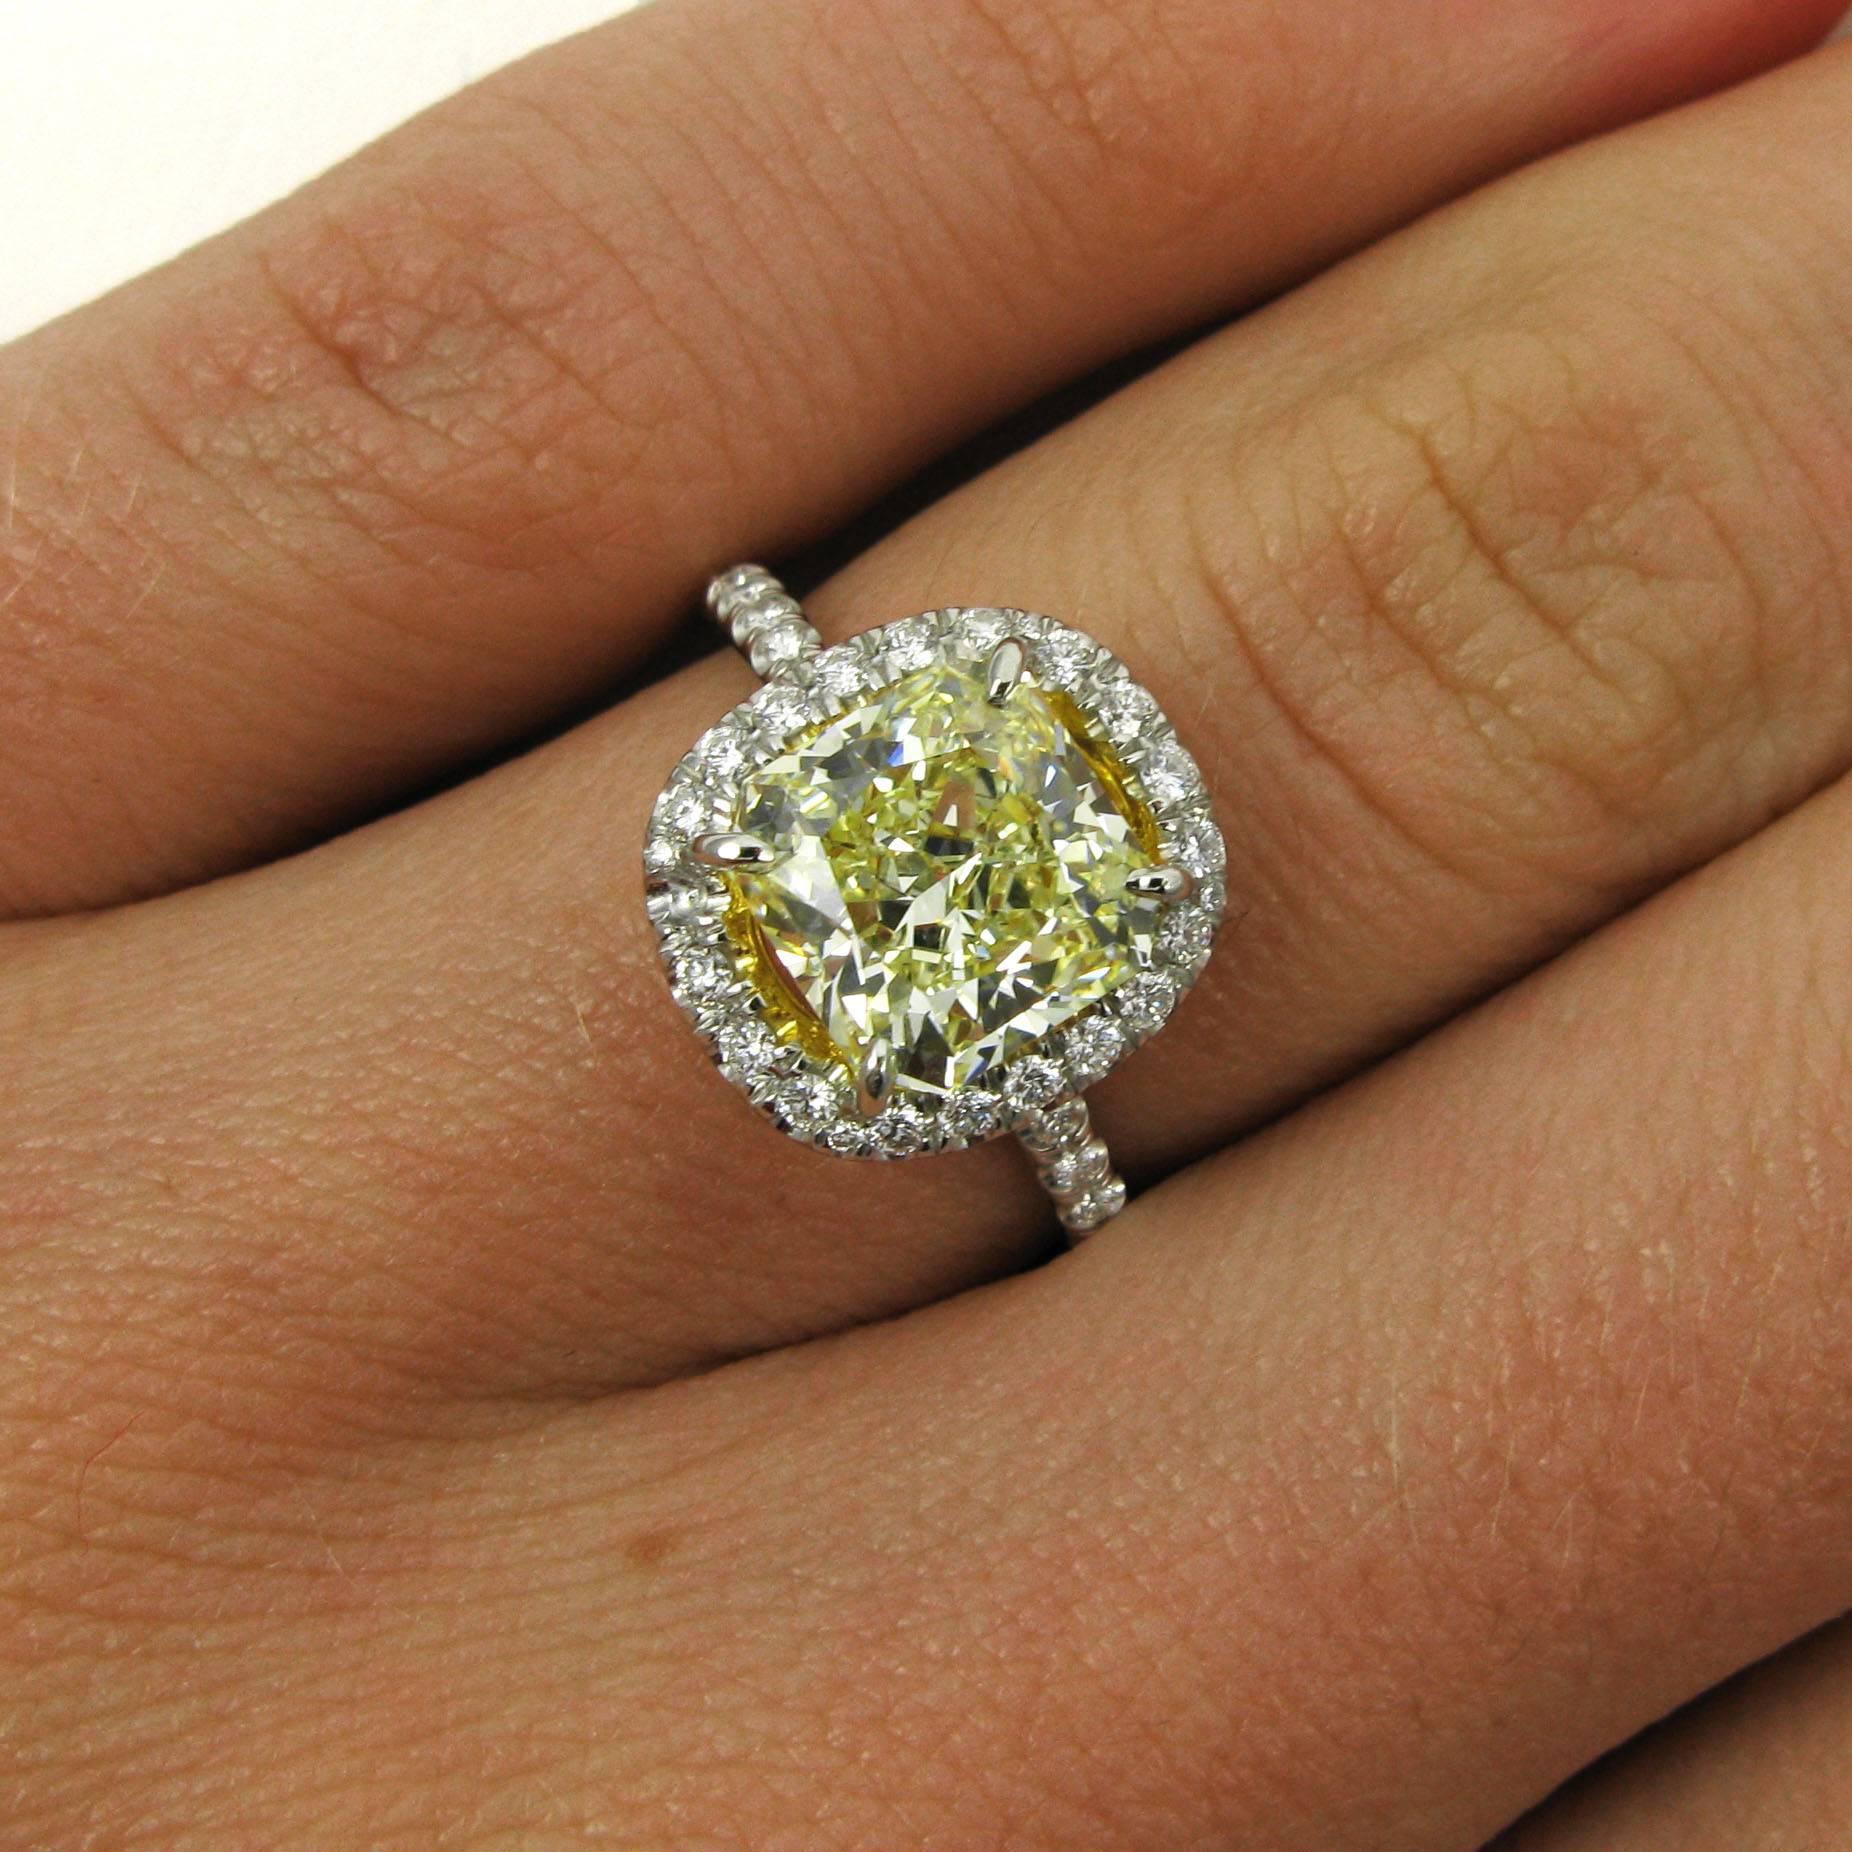 This lovely ring centers on a 2.39 carat radiant-cut diamond with Fancy Light Yellow color and VS1 clarity. The diamond is set with 18k yellow gold prongs into a platinum halo frame ring studded with approx. 0.60 carat of pave white diamonds. 

This